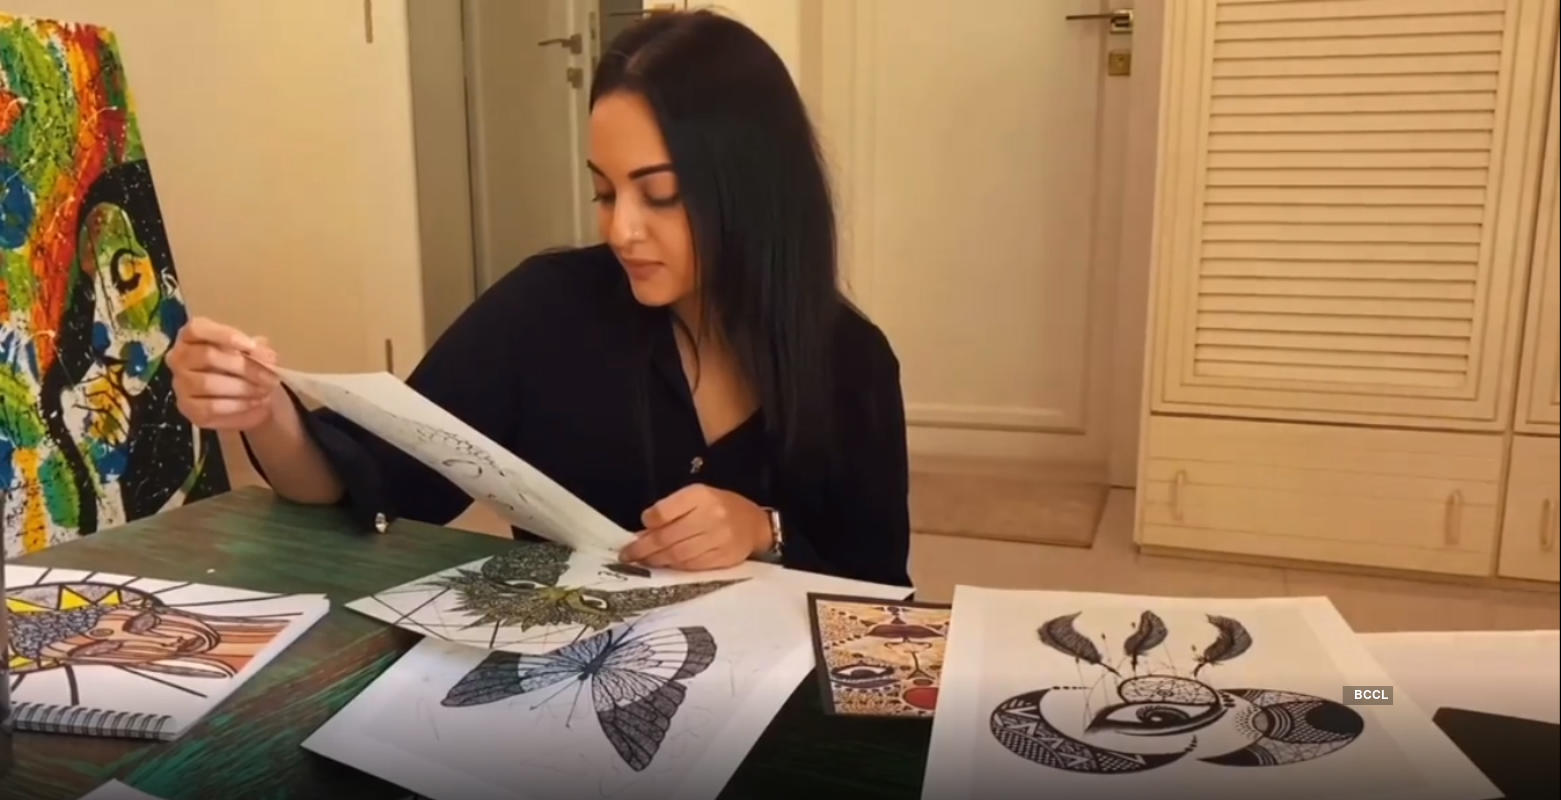 Covid-19 outbreak: Sonakshi Sinha auctions her artwork to raise fund for daily wage workers